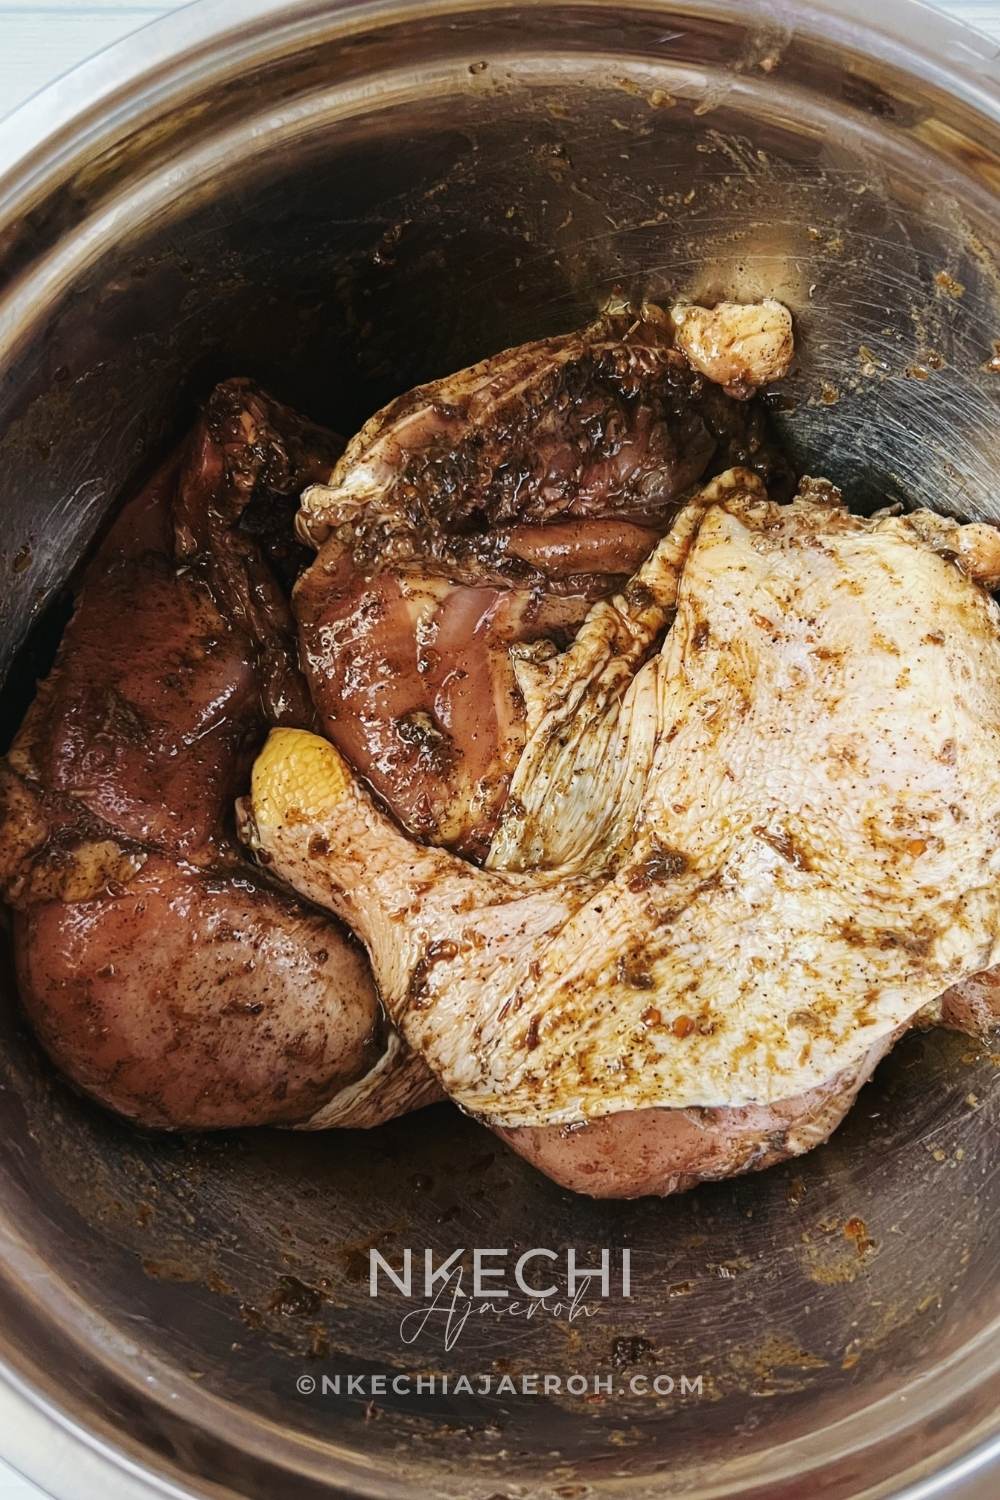 Here is the BEST EVER chicken leg quarters with jerk seasoning! If you are tired of the mid chicken recipes we have out here on the internet, I feel ya. The best-tasting chicken that you will come back to over and over again is here! This super delicious and easy-to-make air fryer chicken quarters recipe is flavorful and finger-licking well! Amazingly, this chicken recipe requires only a few ingredients that you may already have in your pantry!
If you don't know, chicken quarters comprise chicken legs (drumsticks) and thighs. You will need the chicken leg quarters with skin on for this recipe.